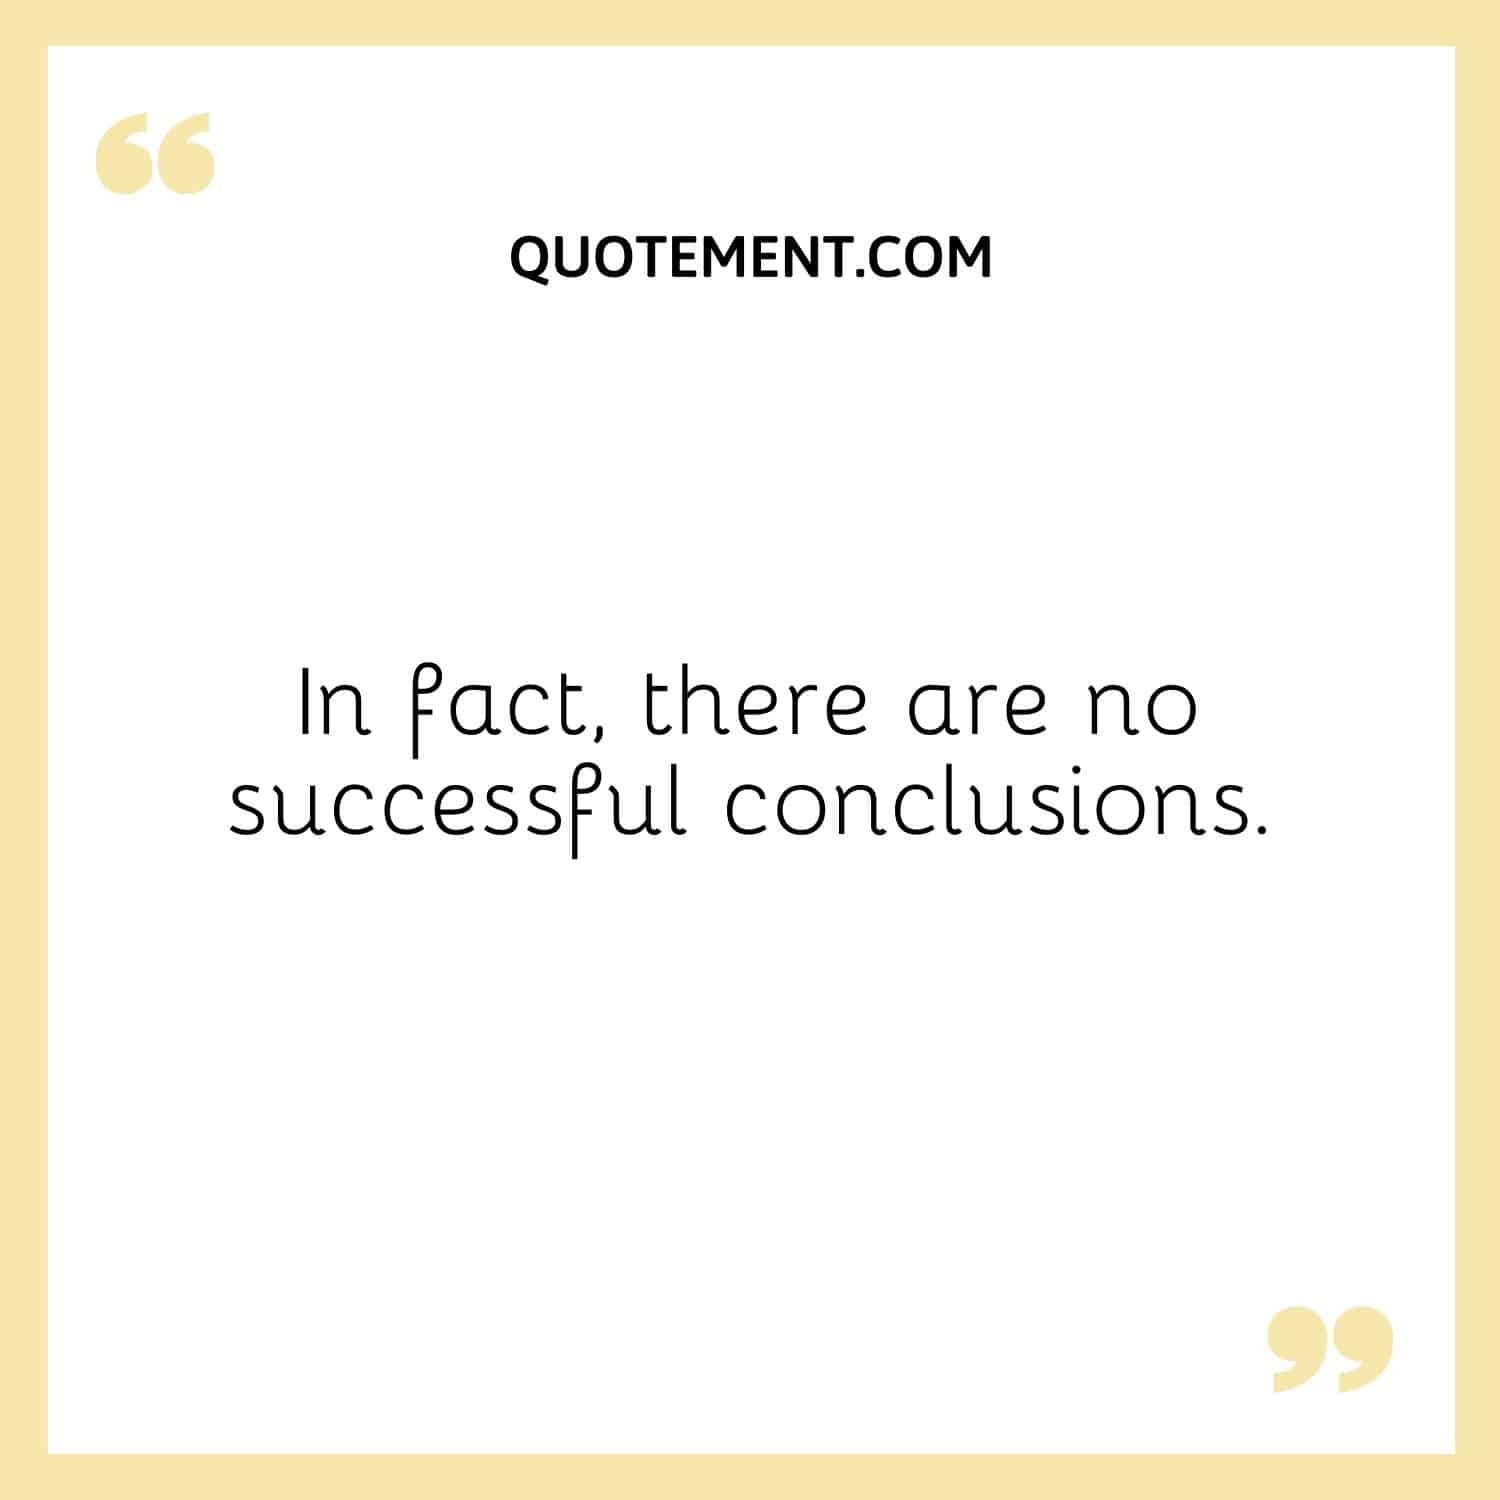 In fact, there are no successful conclusions.